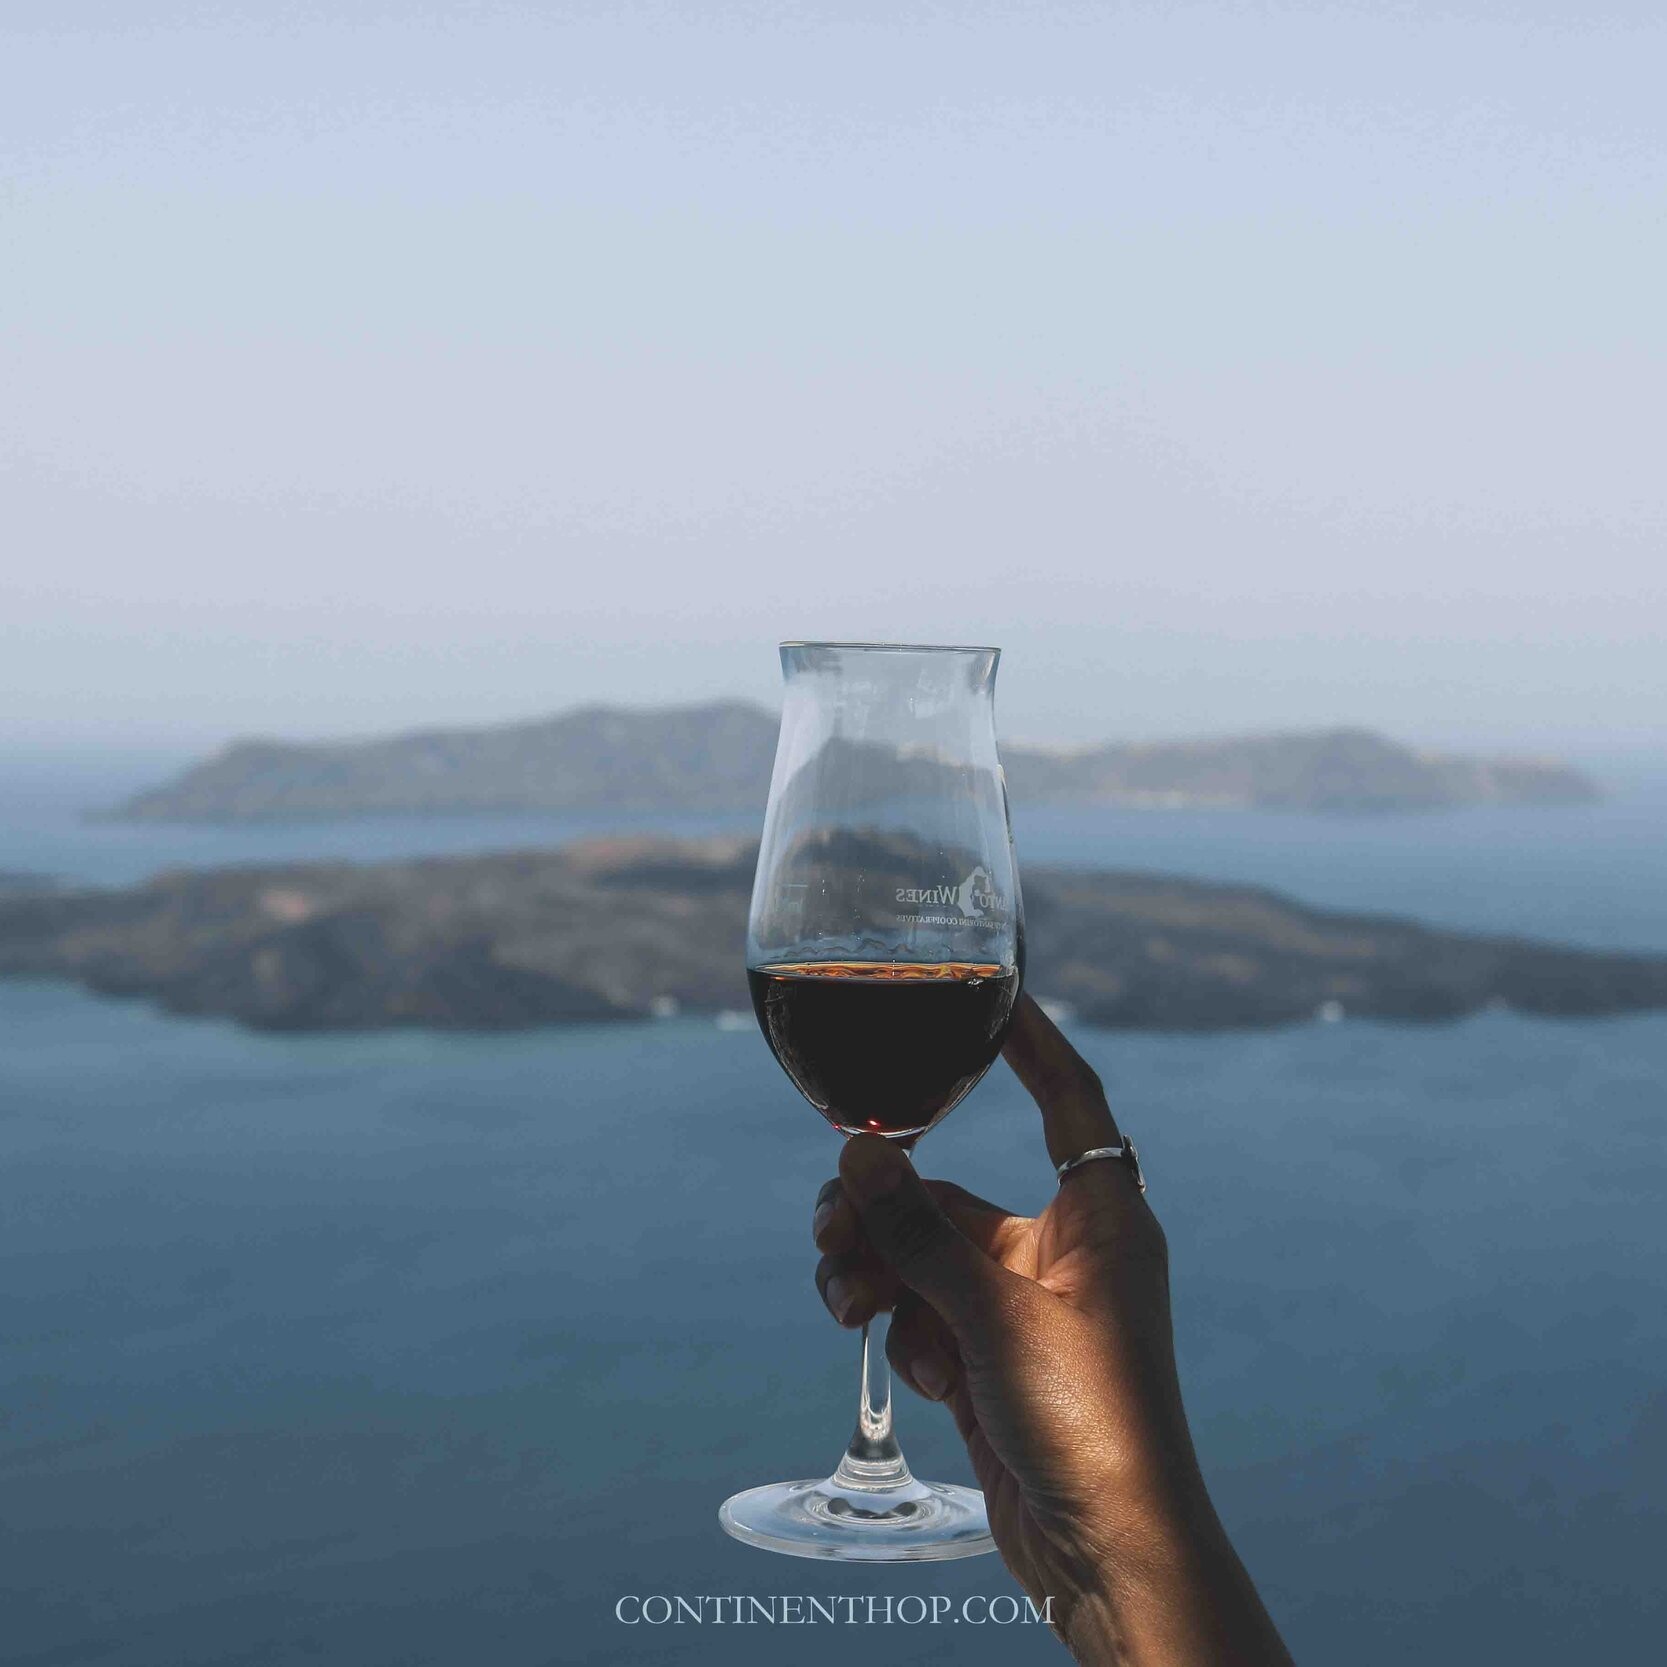 Woman holding glass of wine in Santorini in greece 7 days itinerary